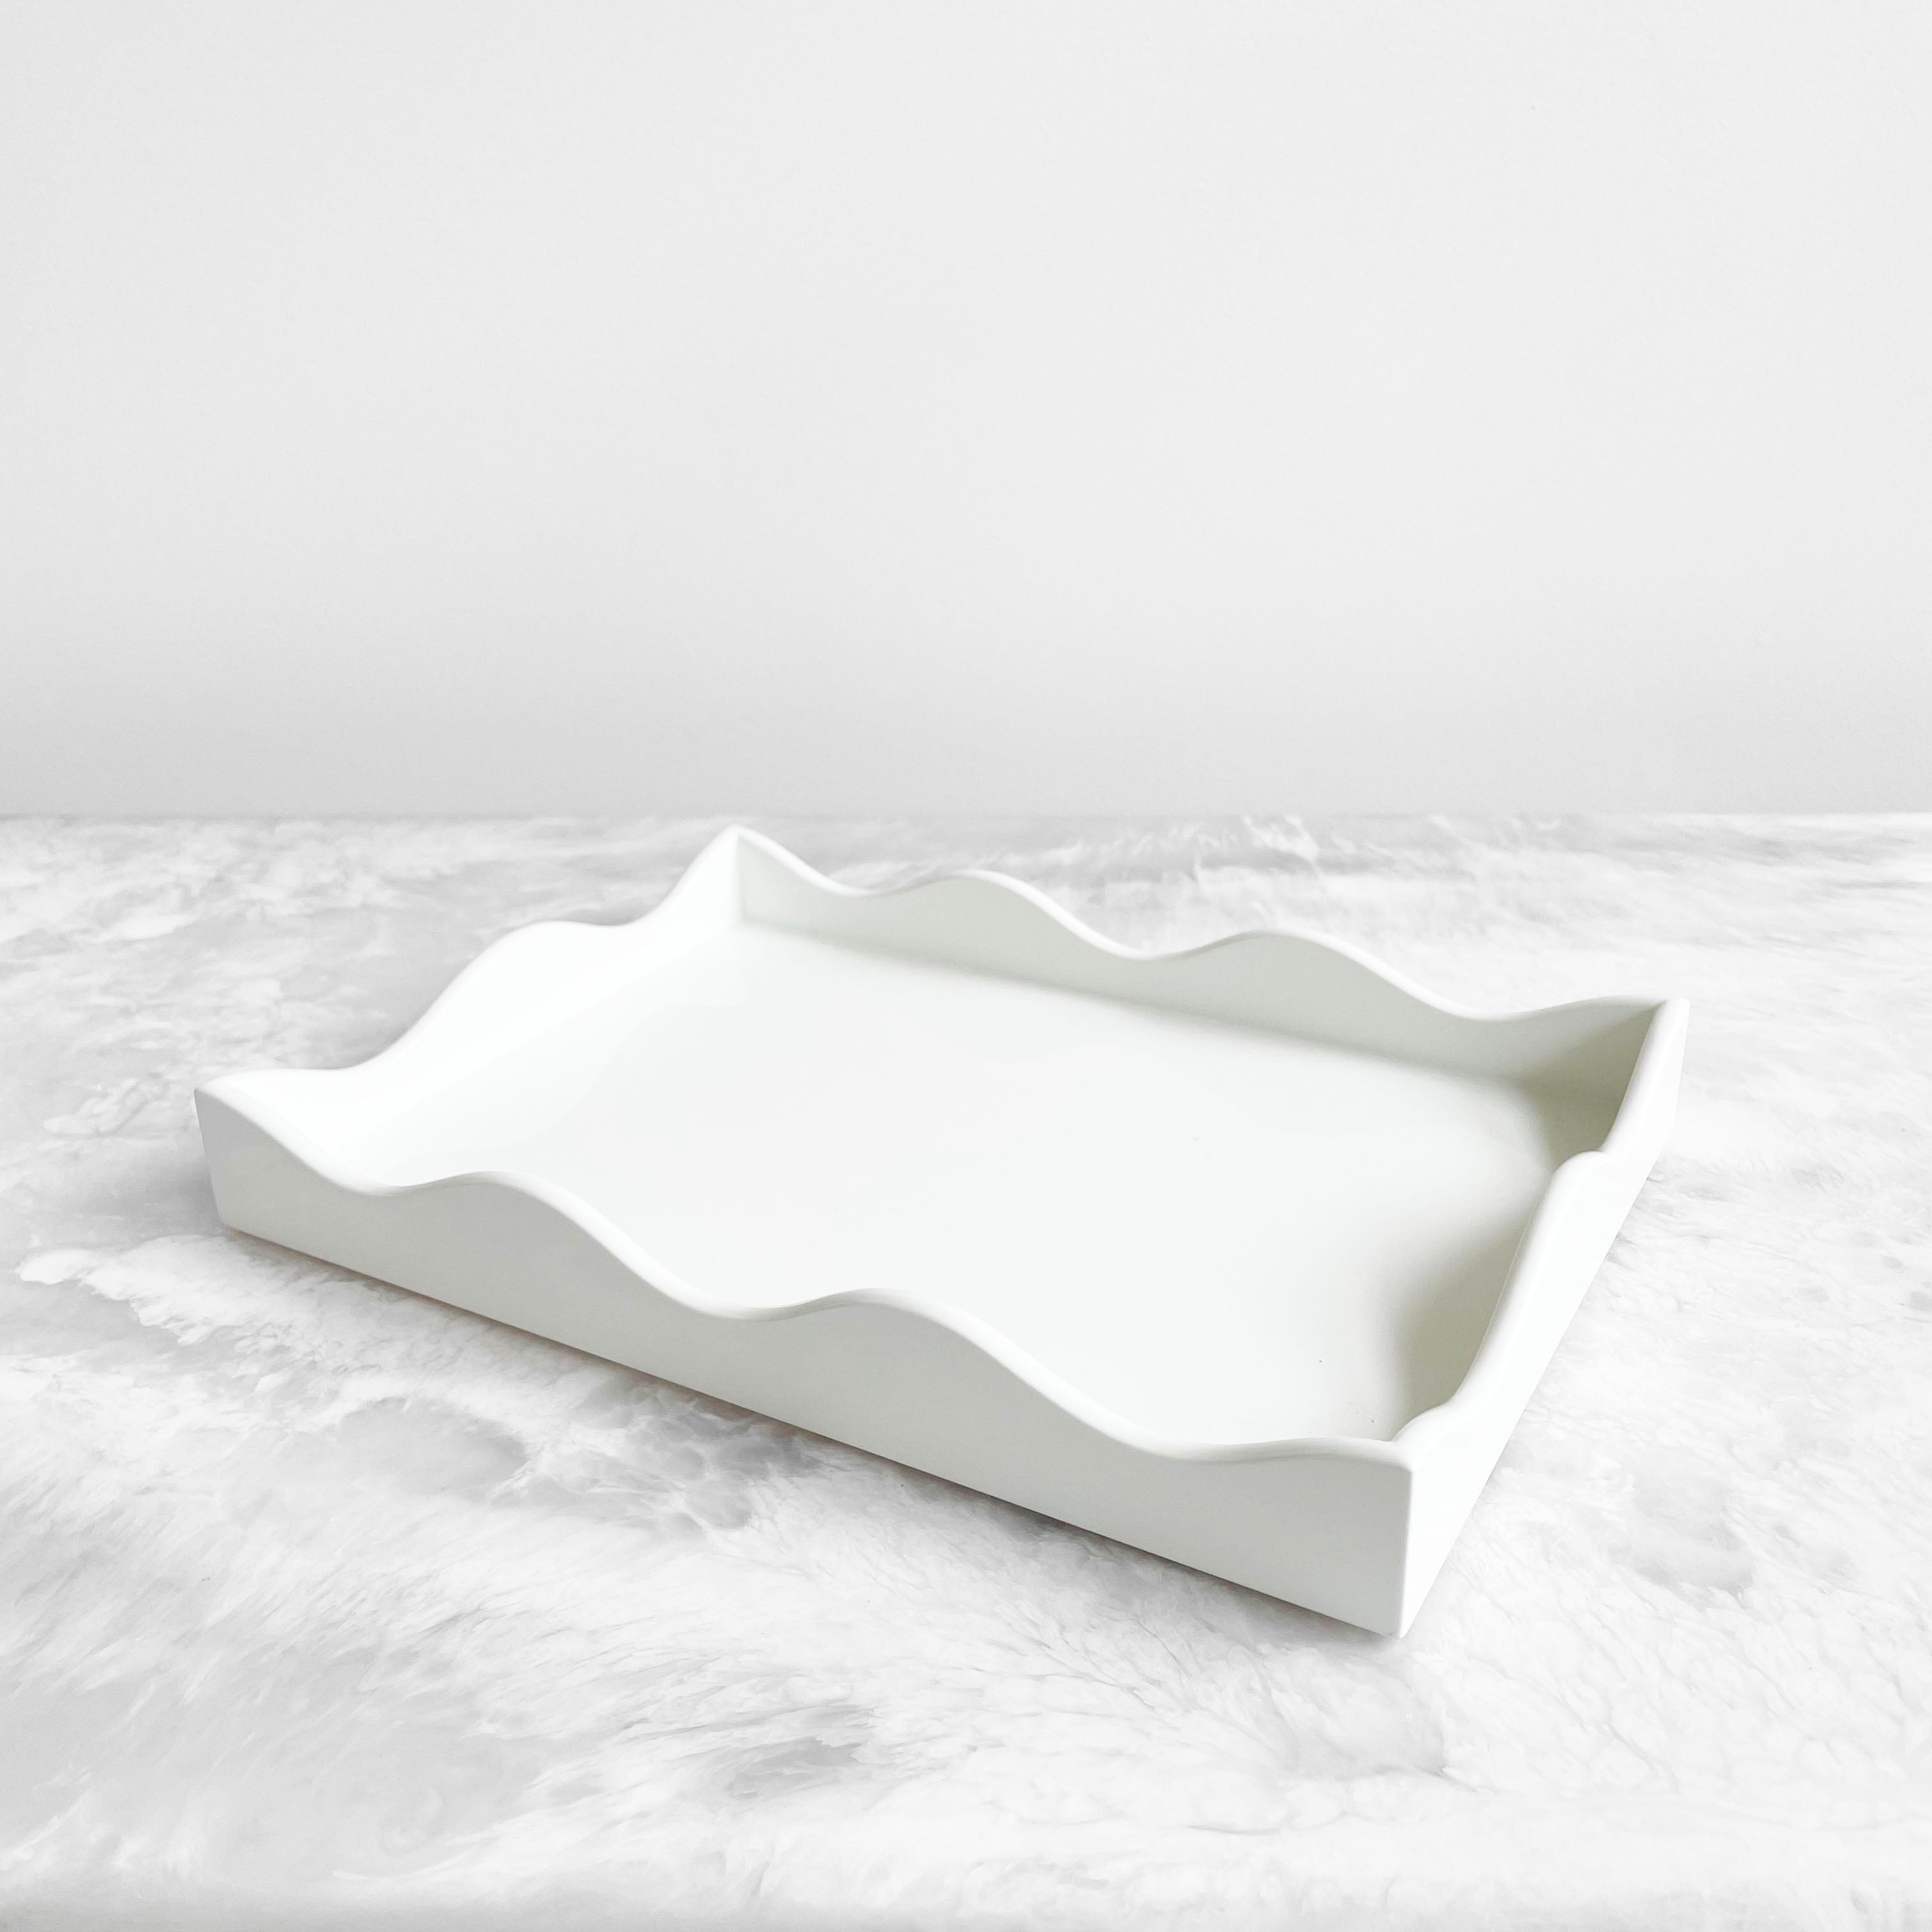 Small Belles Rives – Anyon Lacquer Design Tray Off Atelier White and 